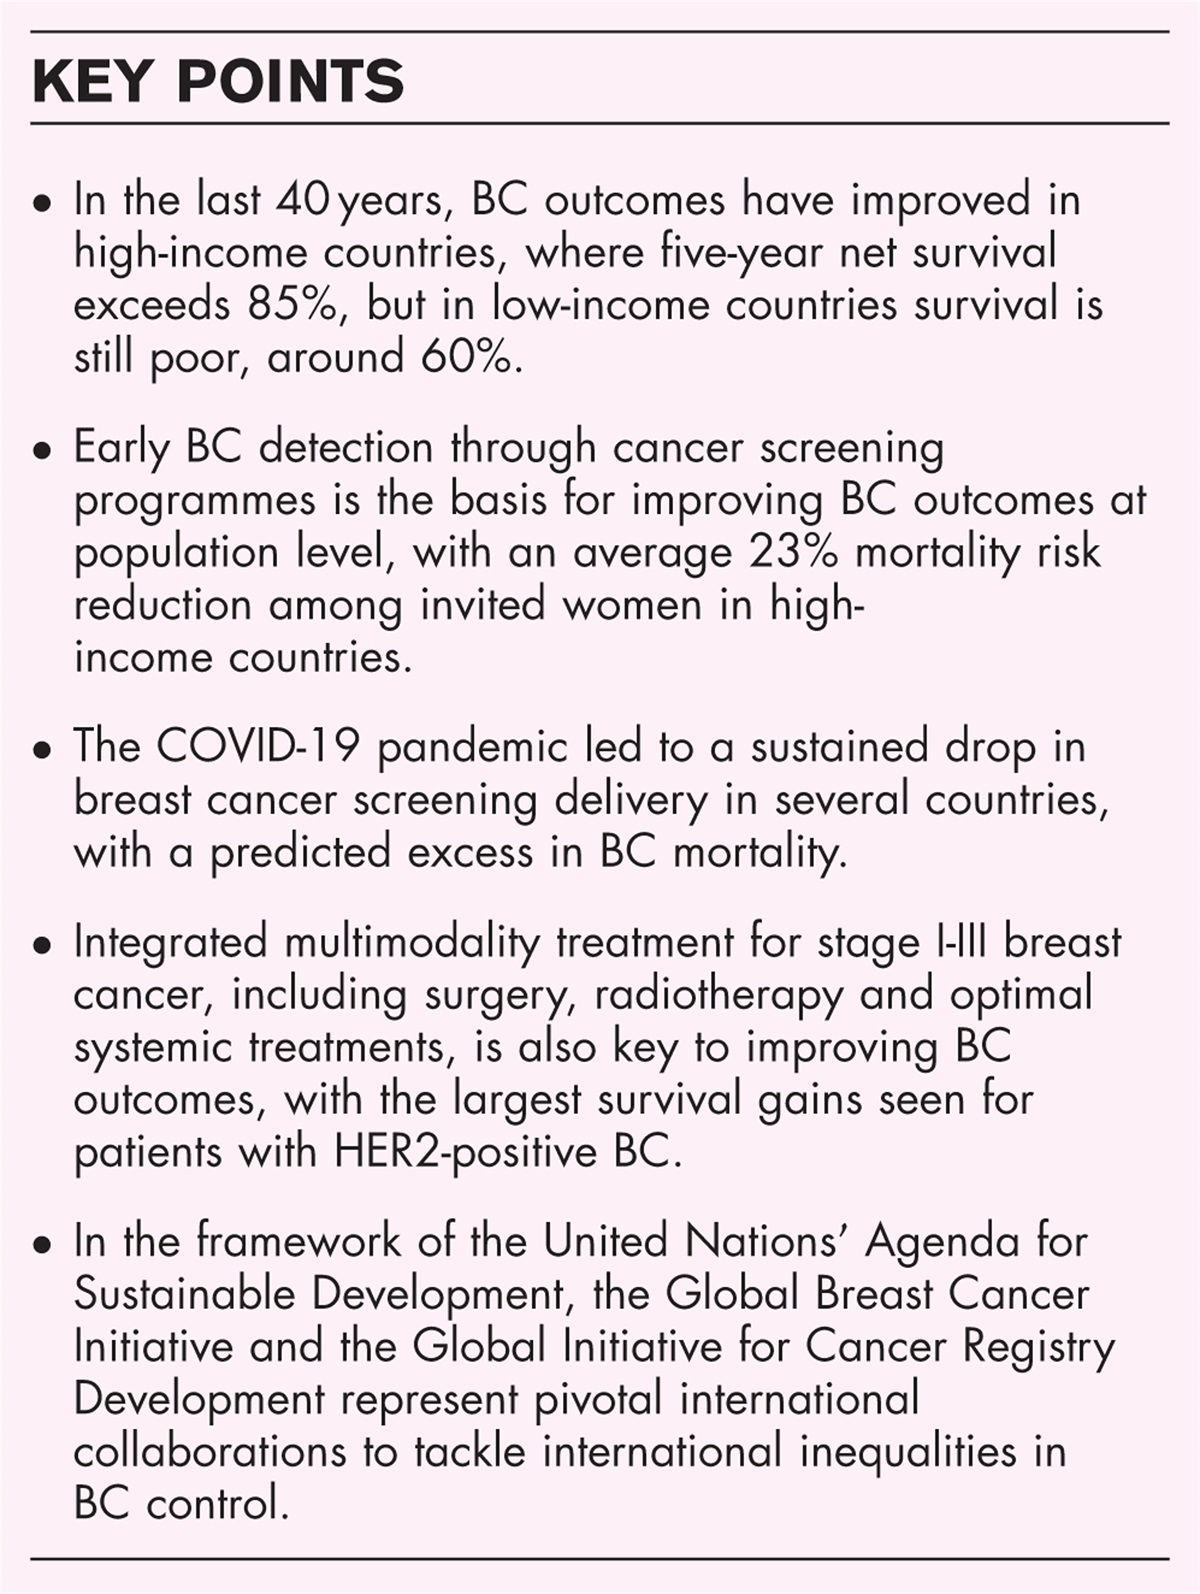 Epidemiology trends and progress in breast cancer survival: earlier diagnosis, new therapeutics